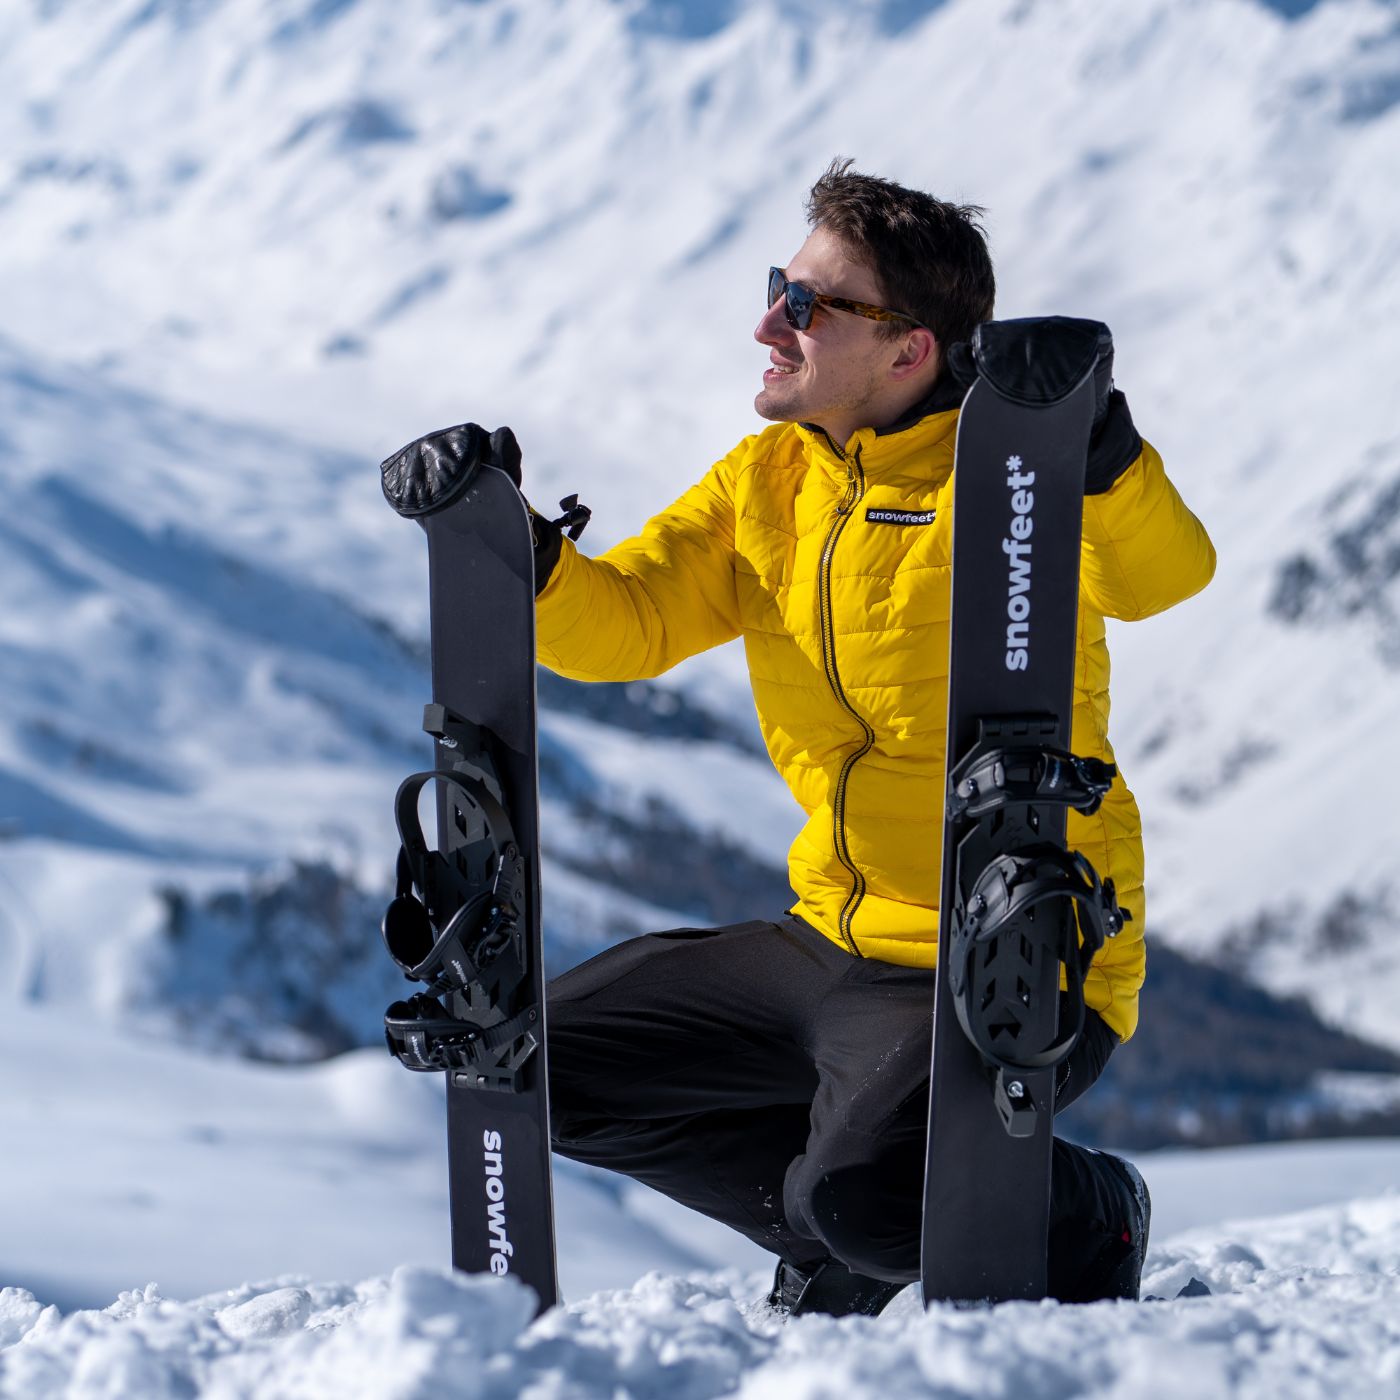 What Boots Do You Need For Backcountry Skiing? - snowfeet*